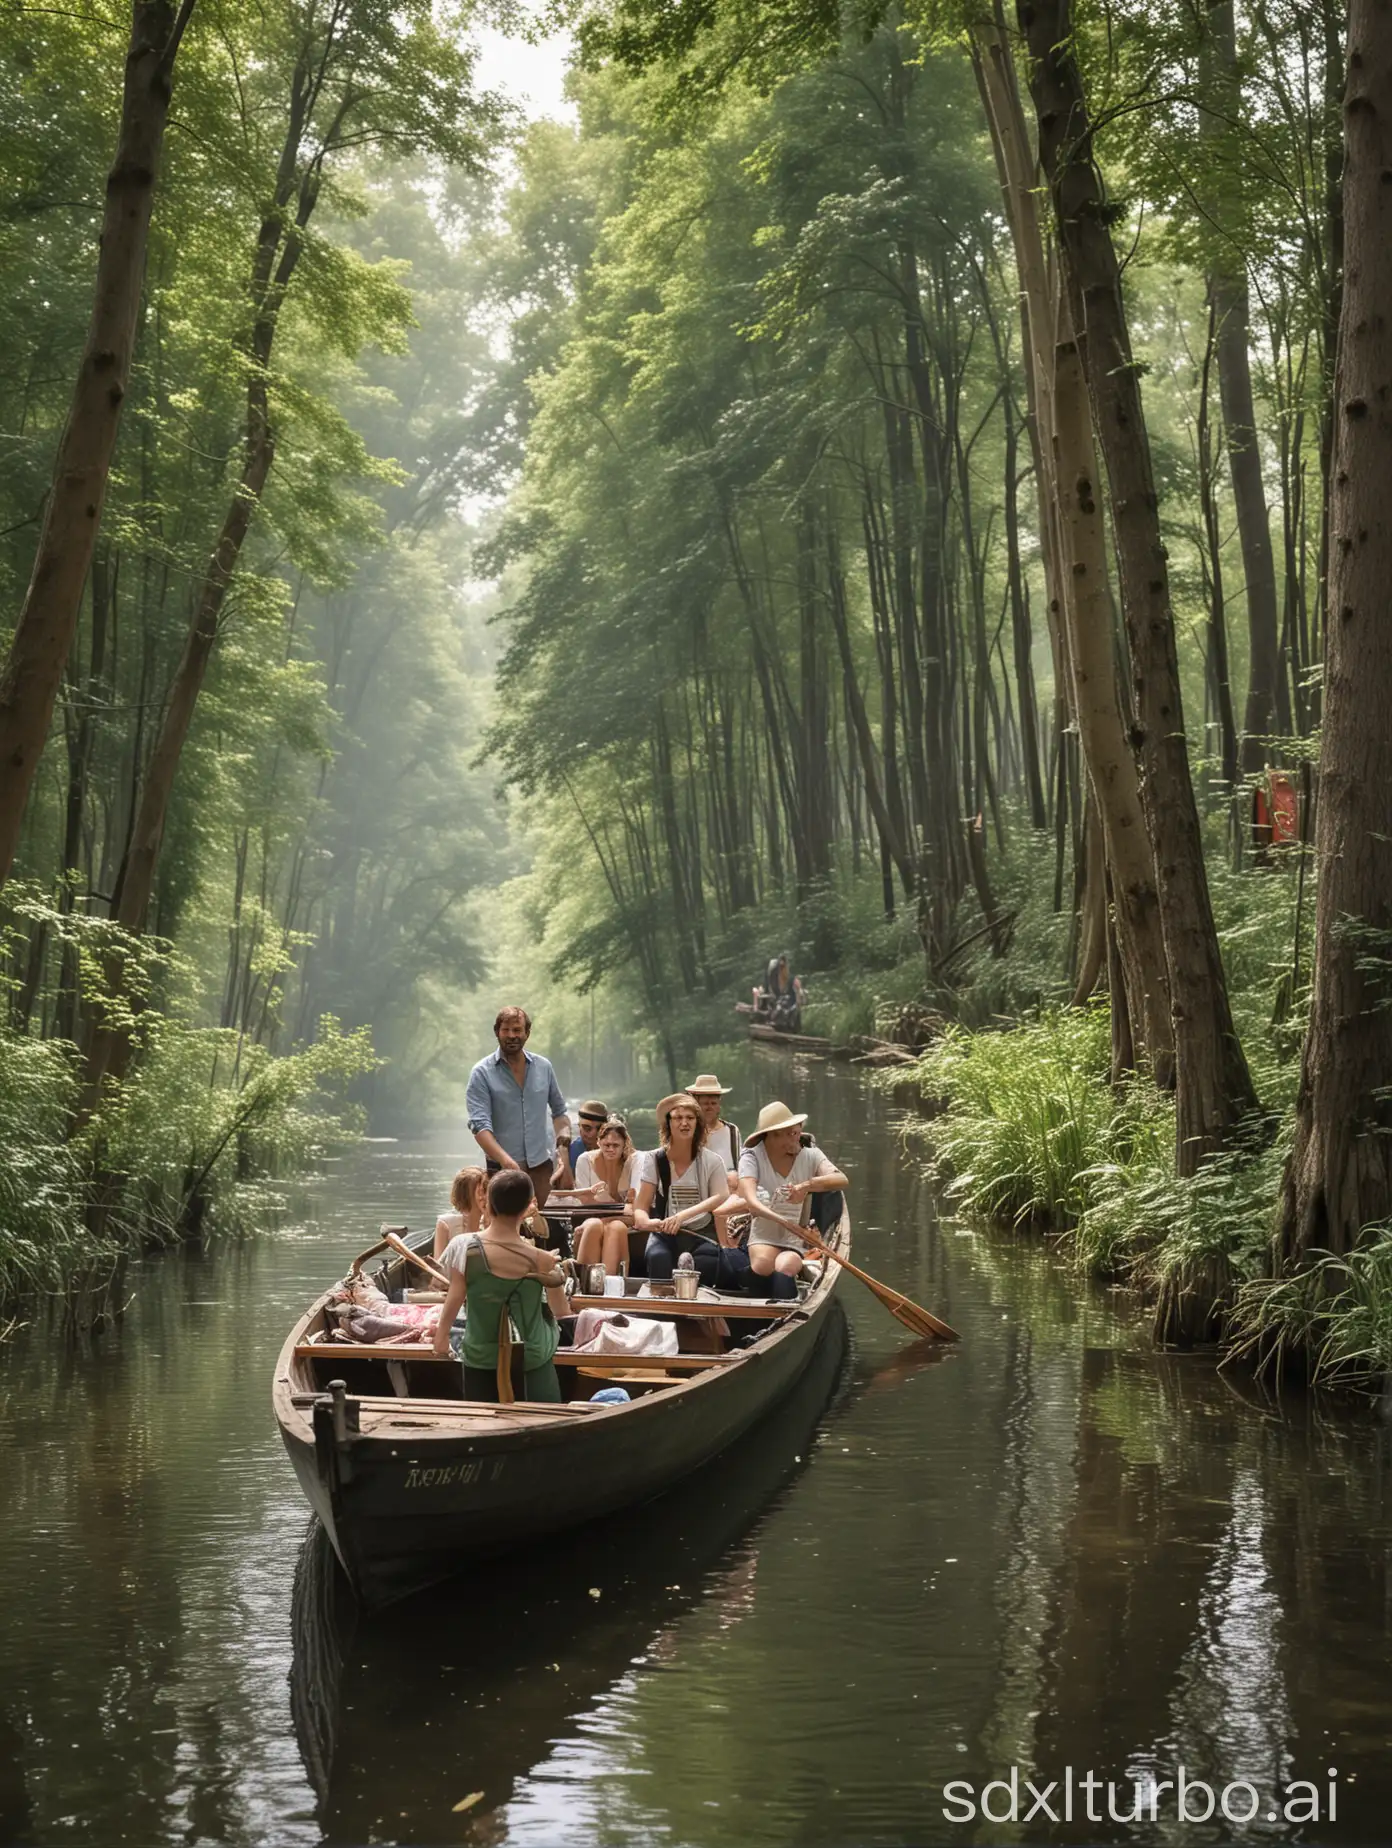 Invitation to a punt ride in Spreewald with subsequent grilling